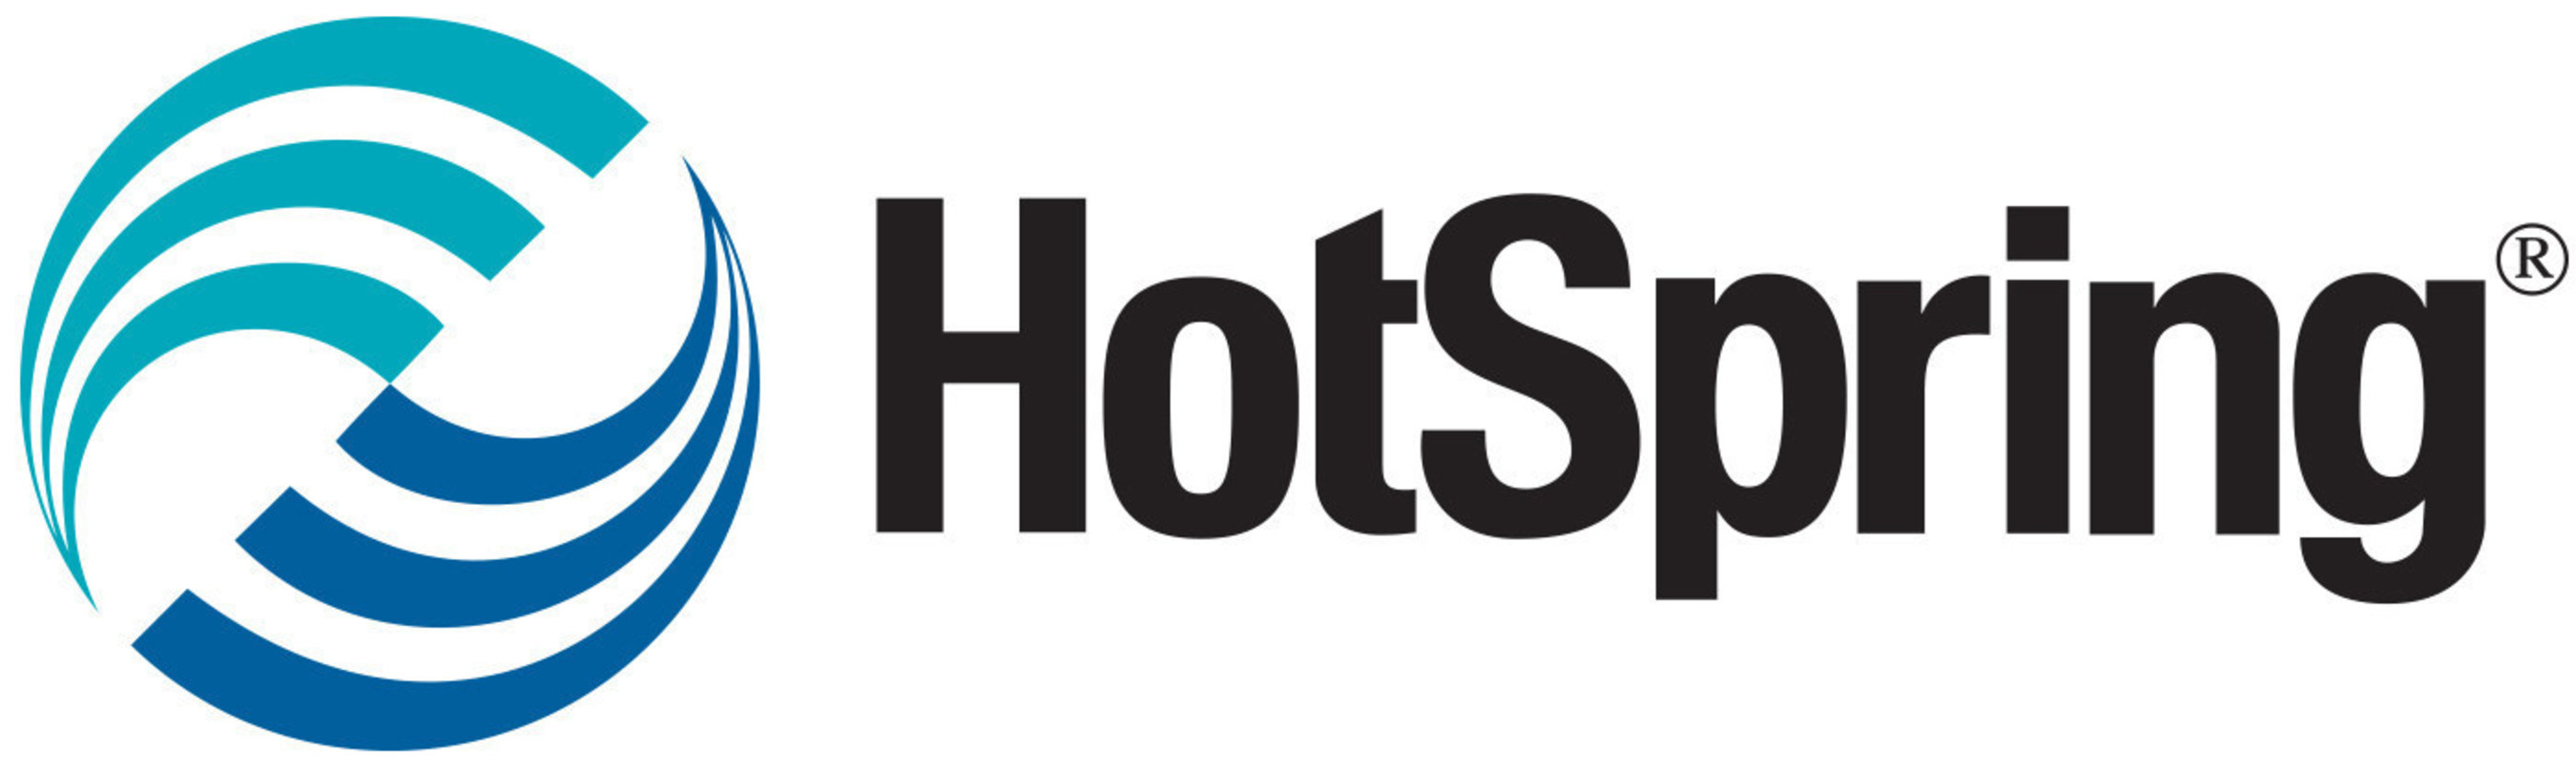 Hot Spring, the world's leading hot tub brand